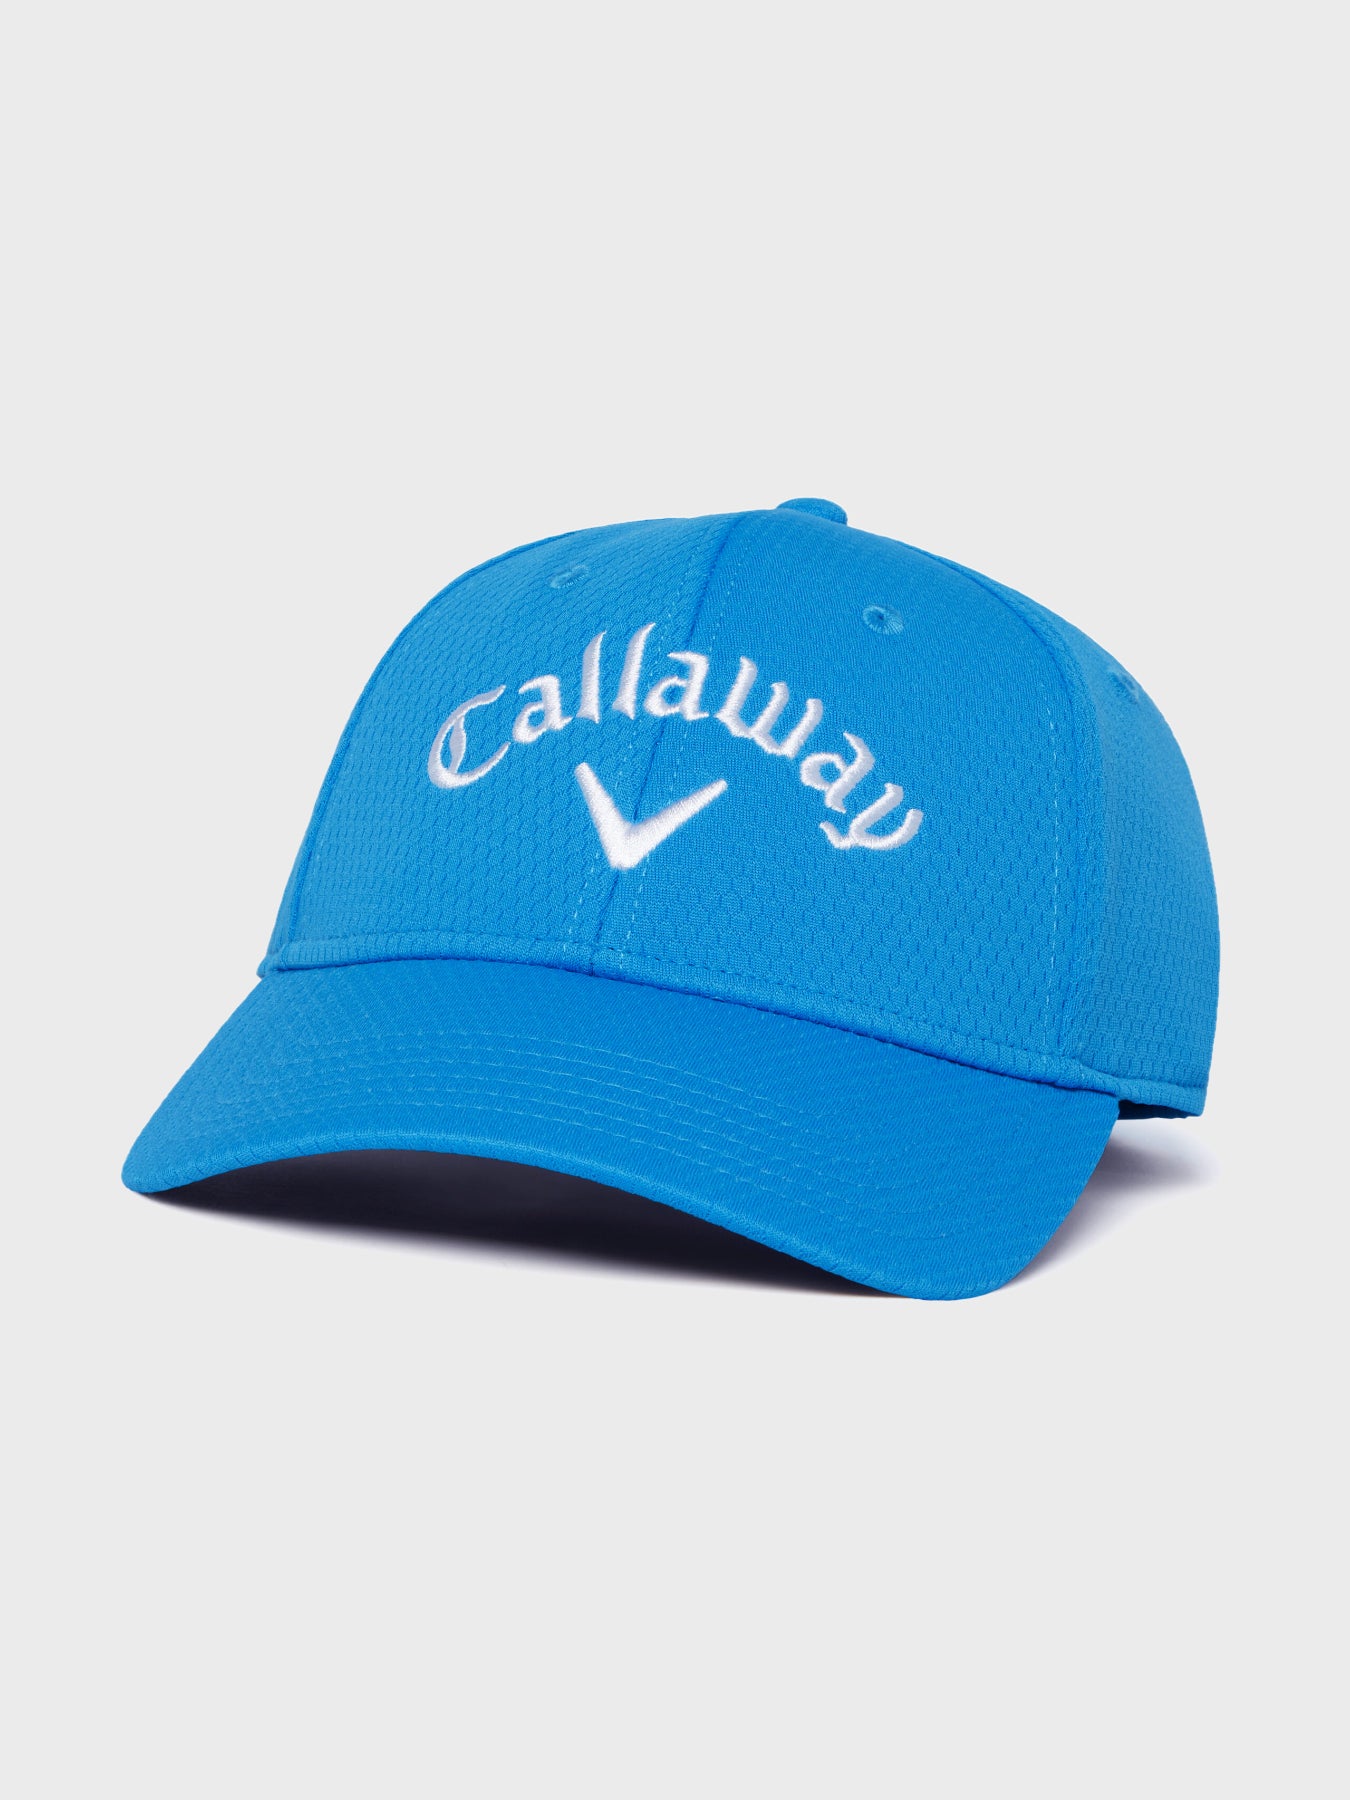 View Womens Side Crested Cap In Ibiza Blue information